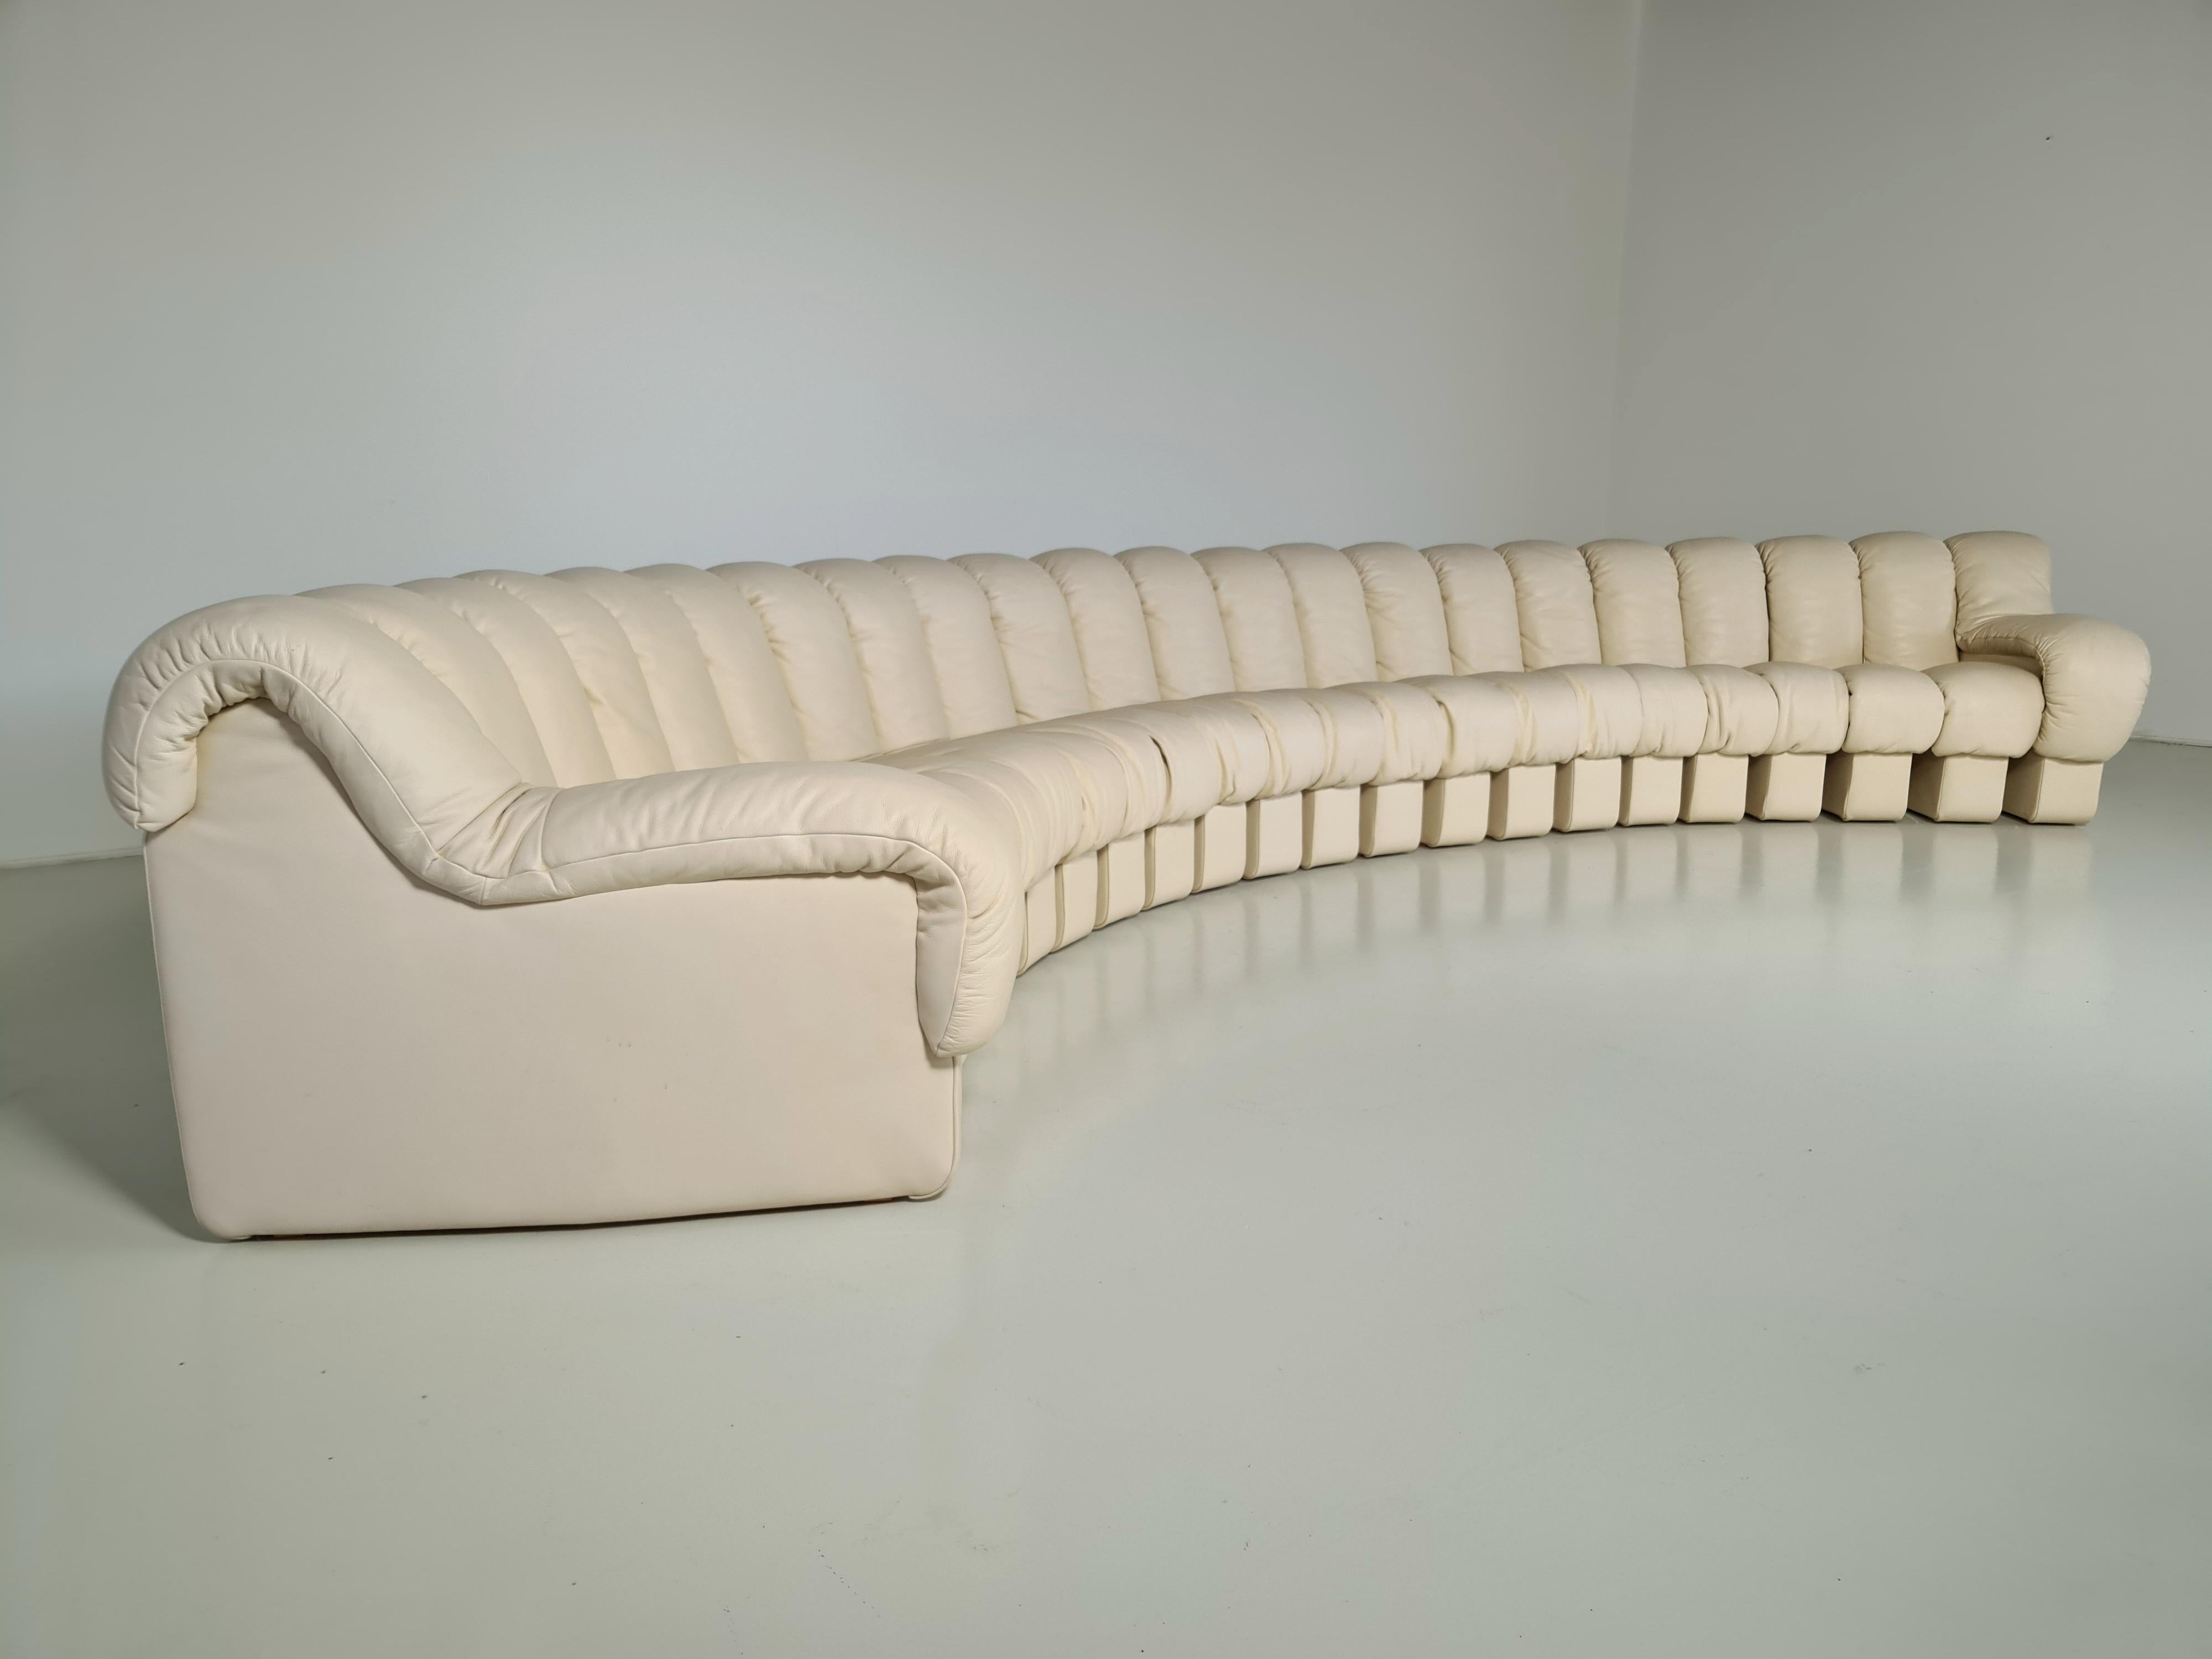 De Sede ‘Snake’ DS-600 creme leather sectional sofa, 1990s

A design by Ueli Berger, Elenora Peduzzi-Riva, Heinz Ulrich and Klaus Vogt for DeSede, Switzerland. De Sede 'Non Stop' sectional sofa containing 22 pieces in a creme full leather. Any